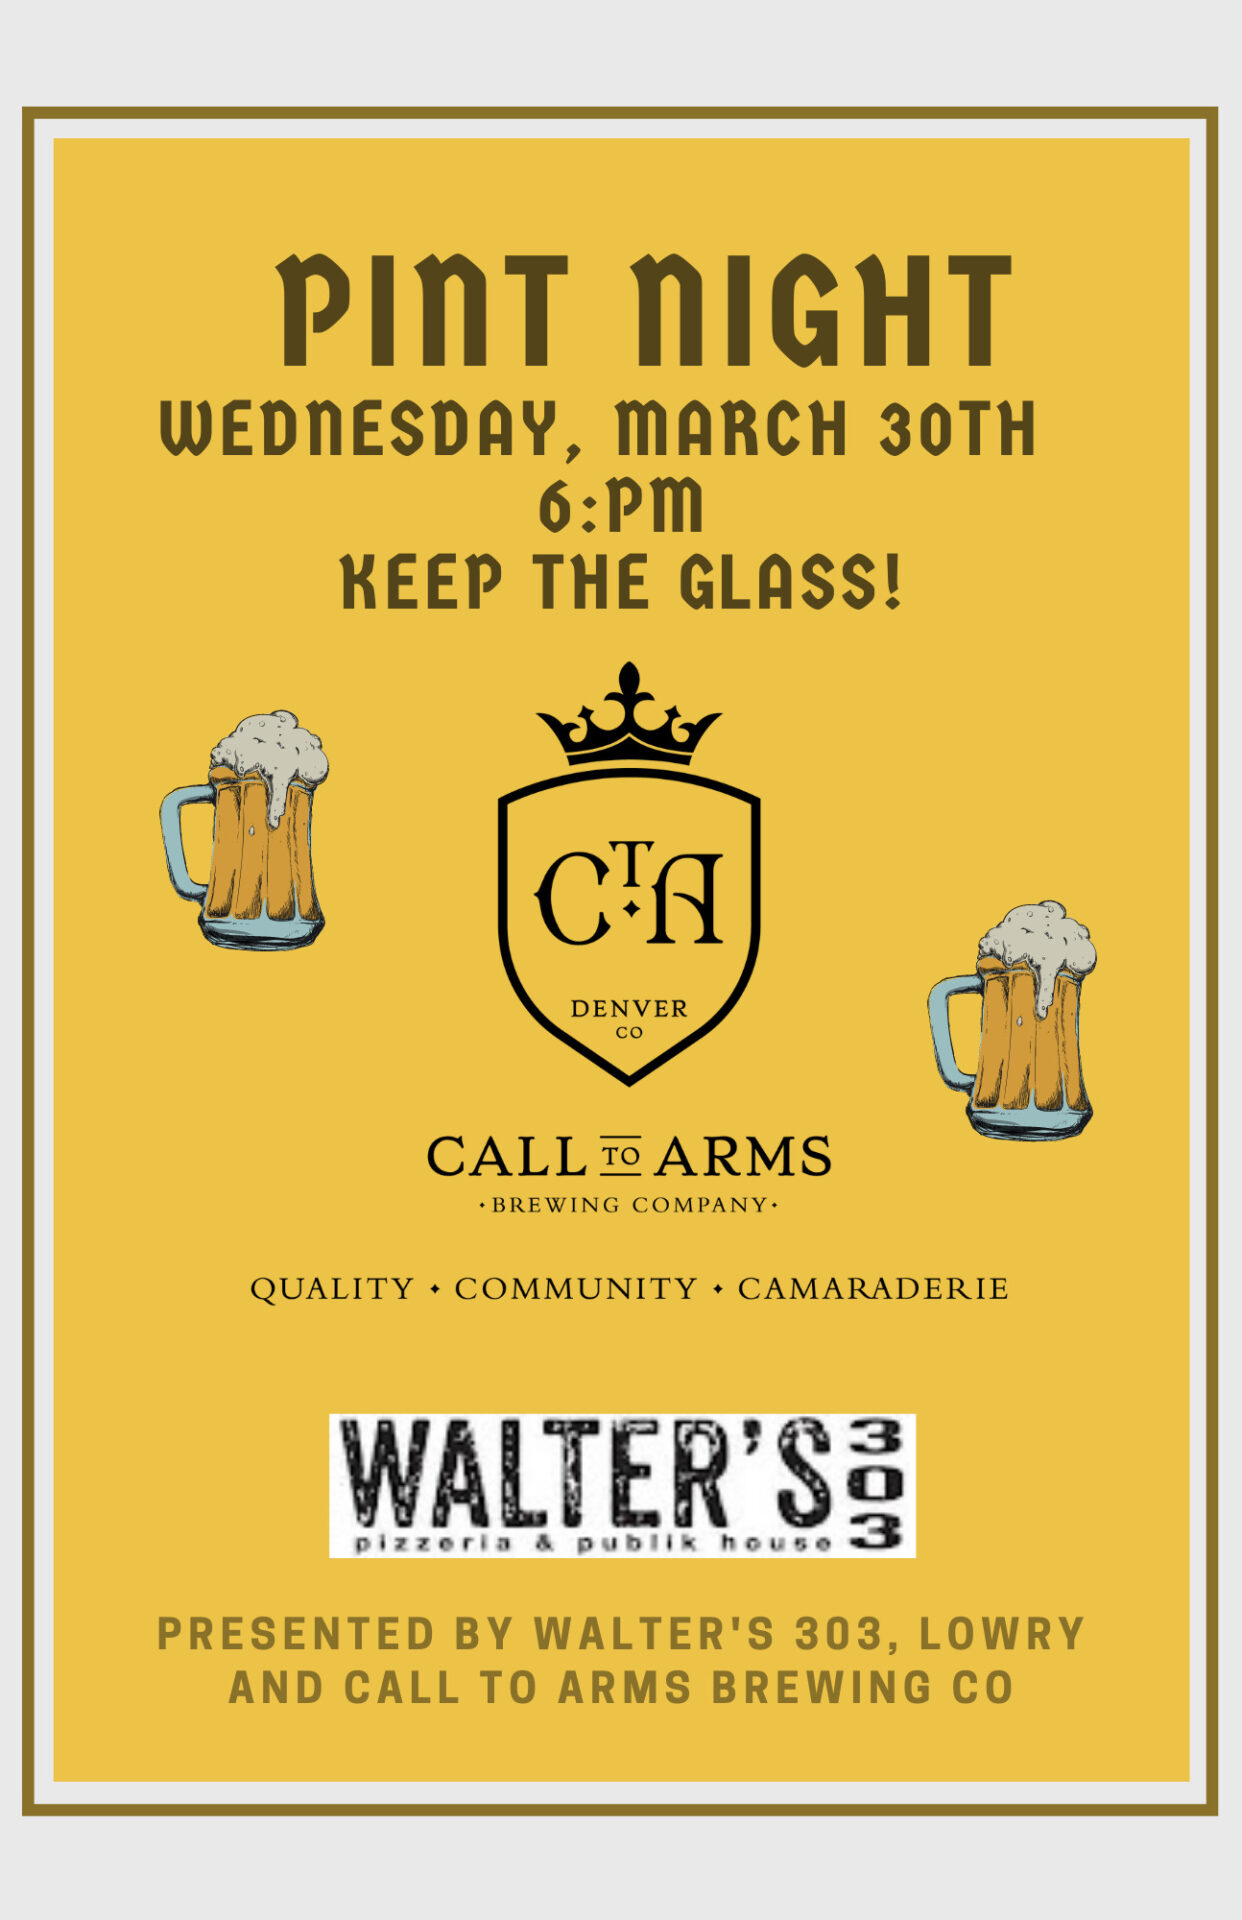 walters-303-pint-night-call-to-arms